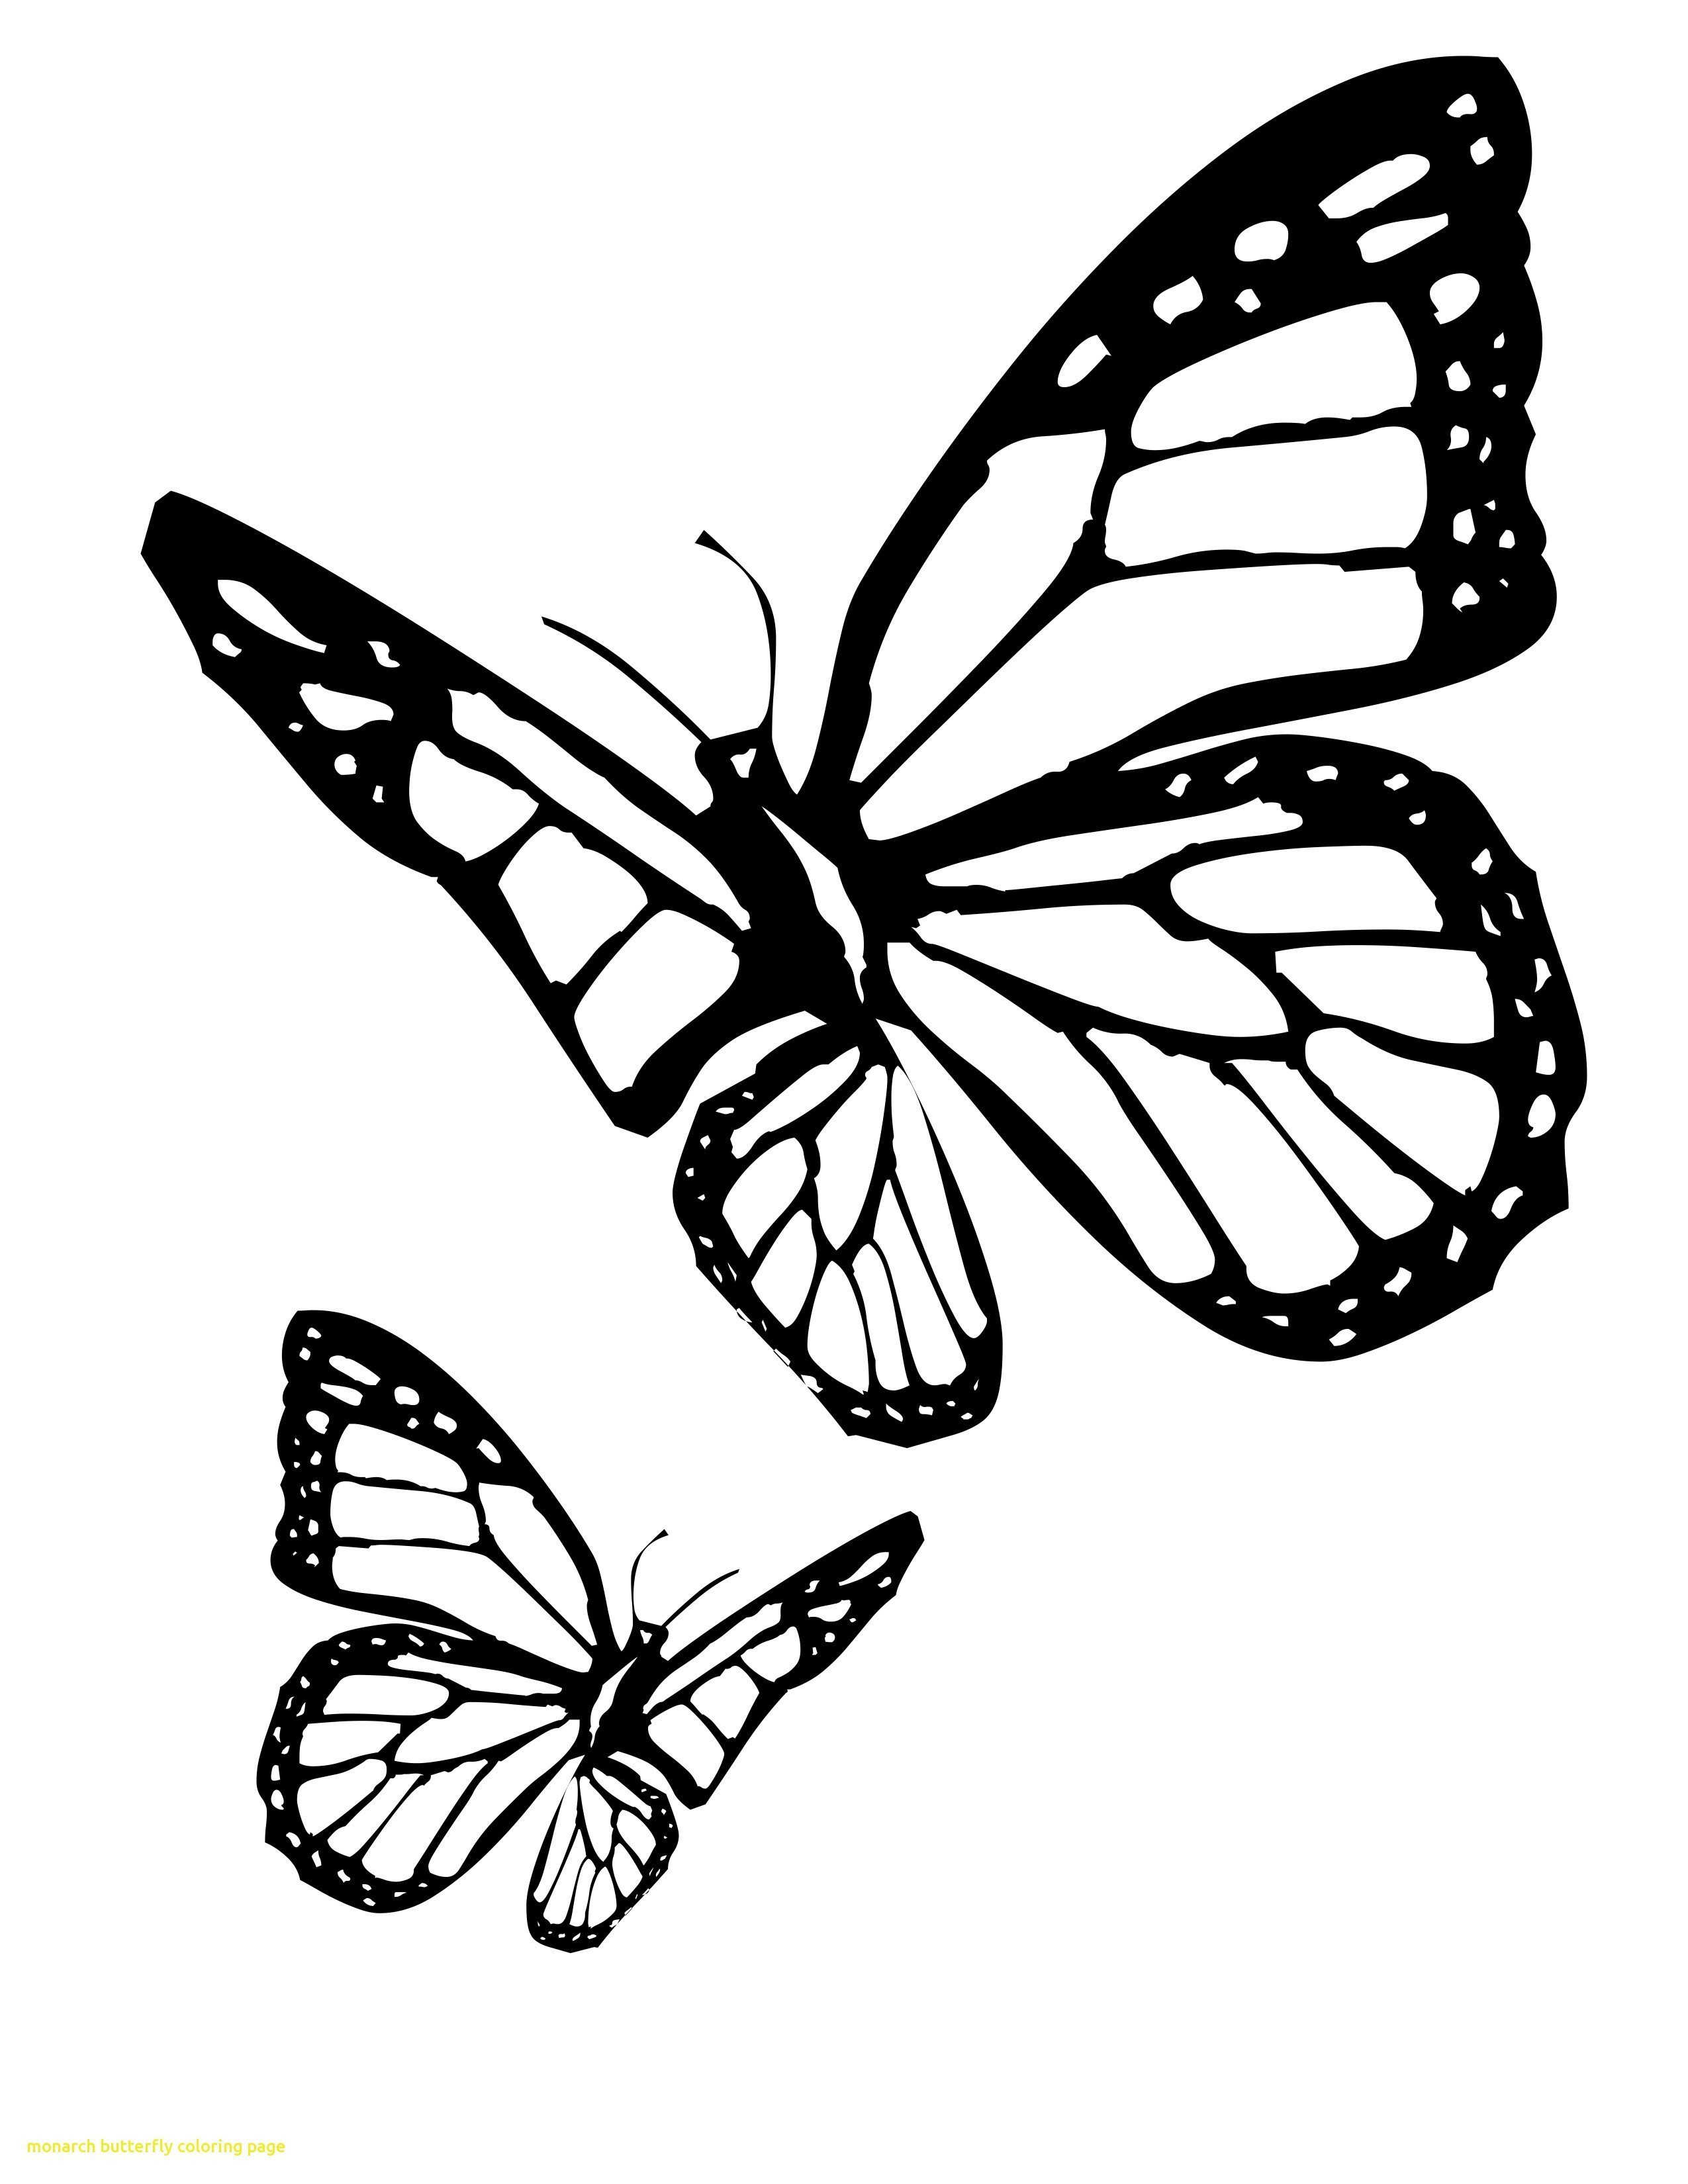 Monarch Butterfly Coloring Page Coloring Ideas Butterflyg Pages For Preschool Free Printable To